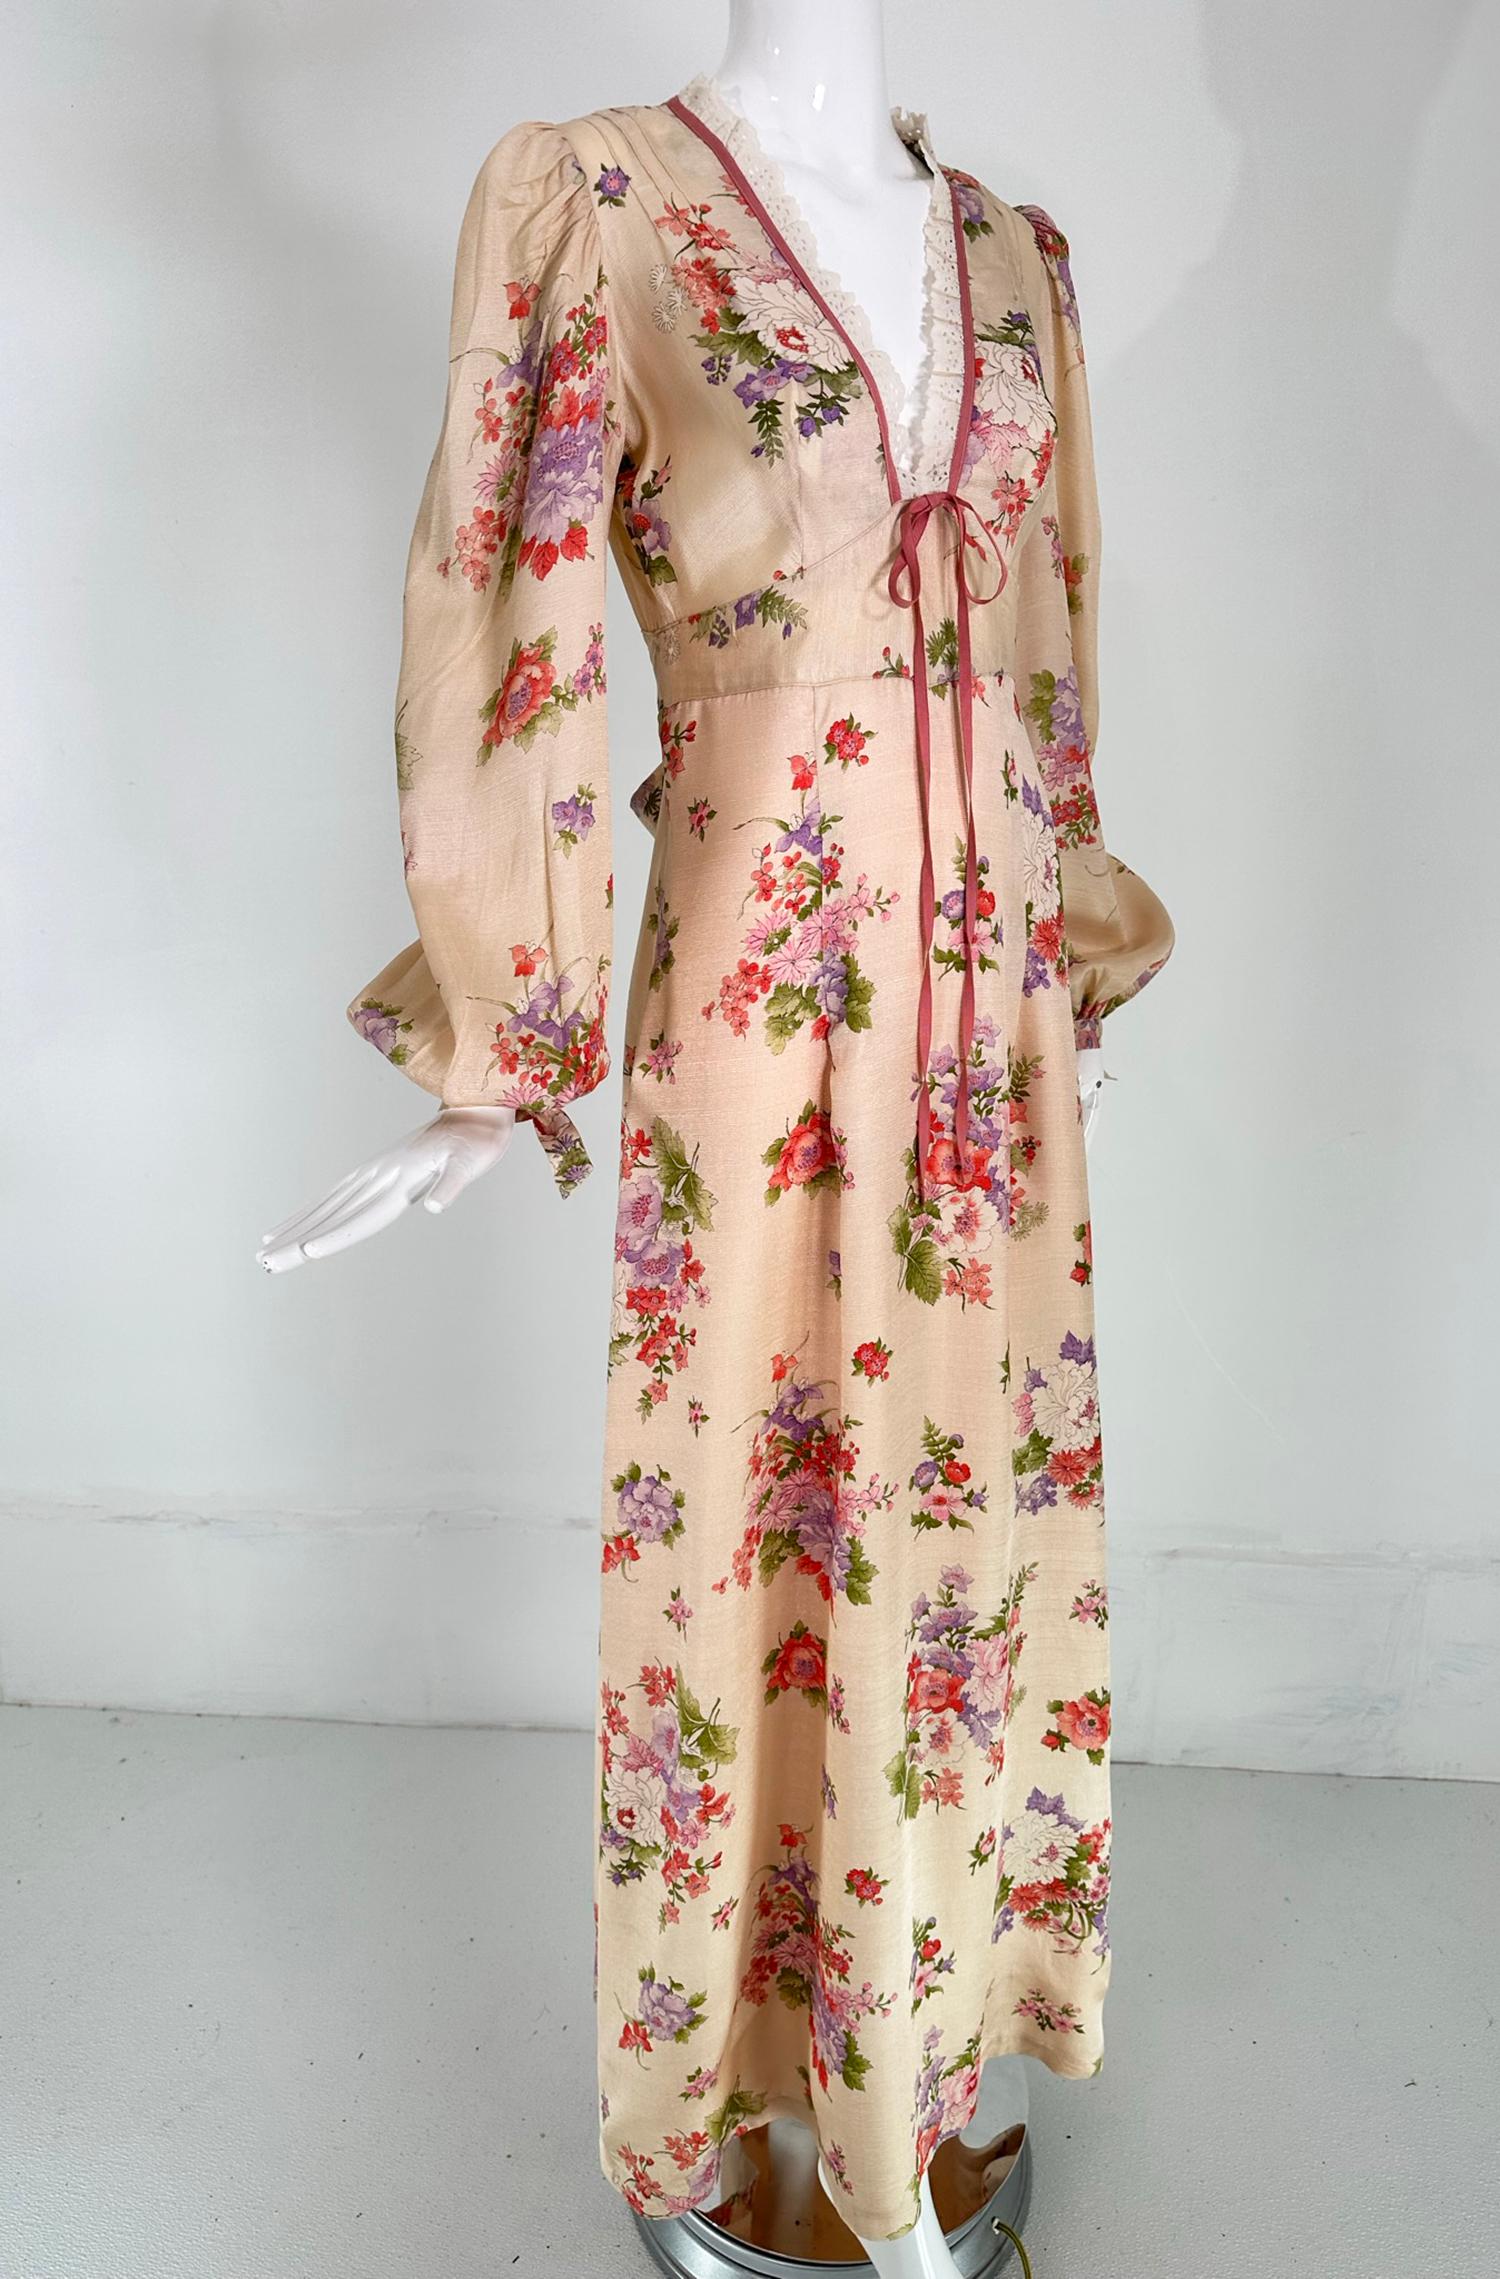 Mini Max of California floral print, bohemian style bishop sleeve maxi dress, retailed at I Magnin. Soft peachy pink ground with pastel flower bouquets scattered across the dress. A very sweet dress with eyelet trimmed neckline in a low V at the